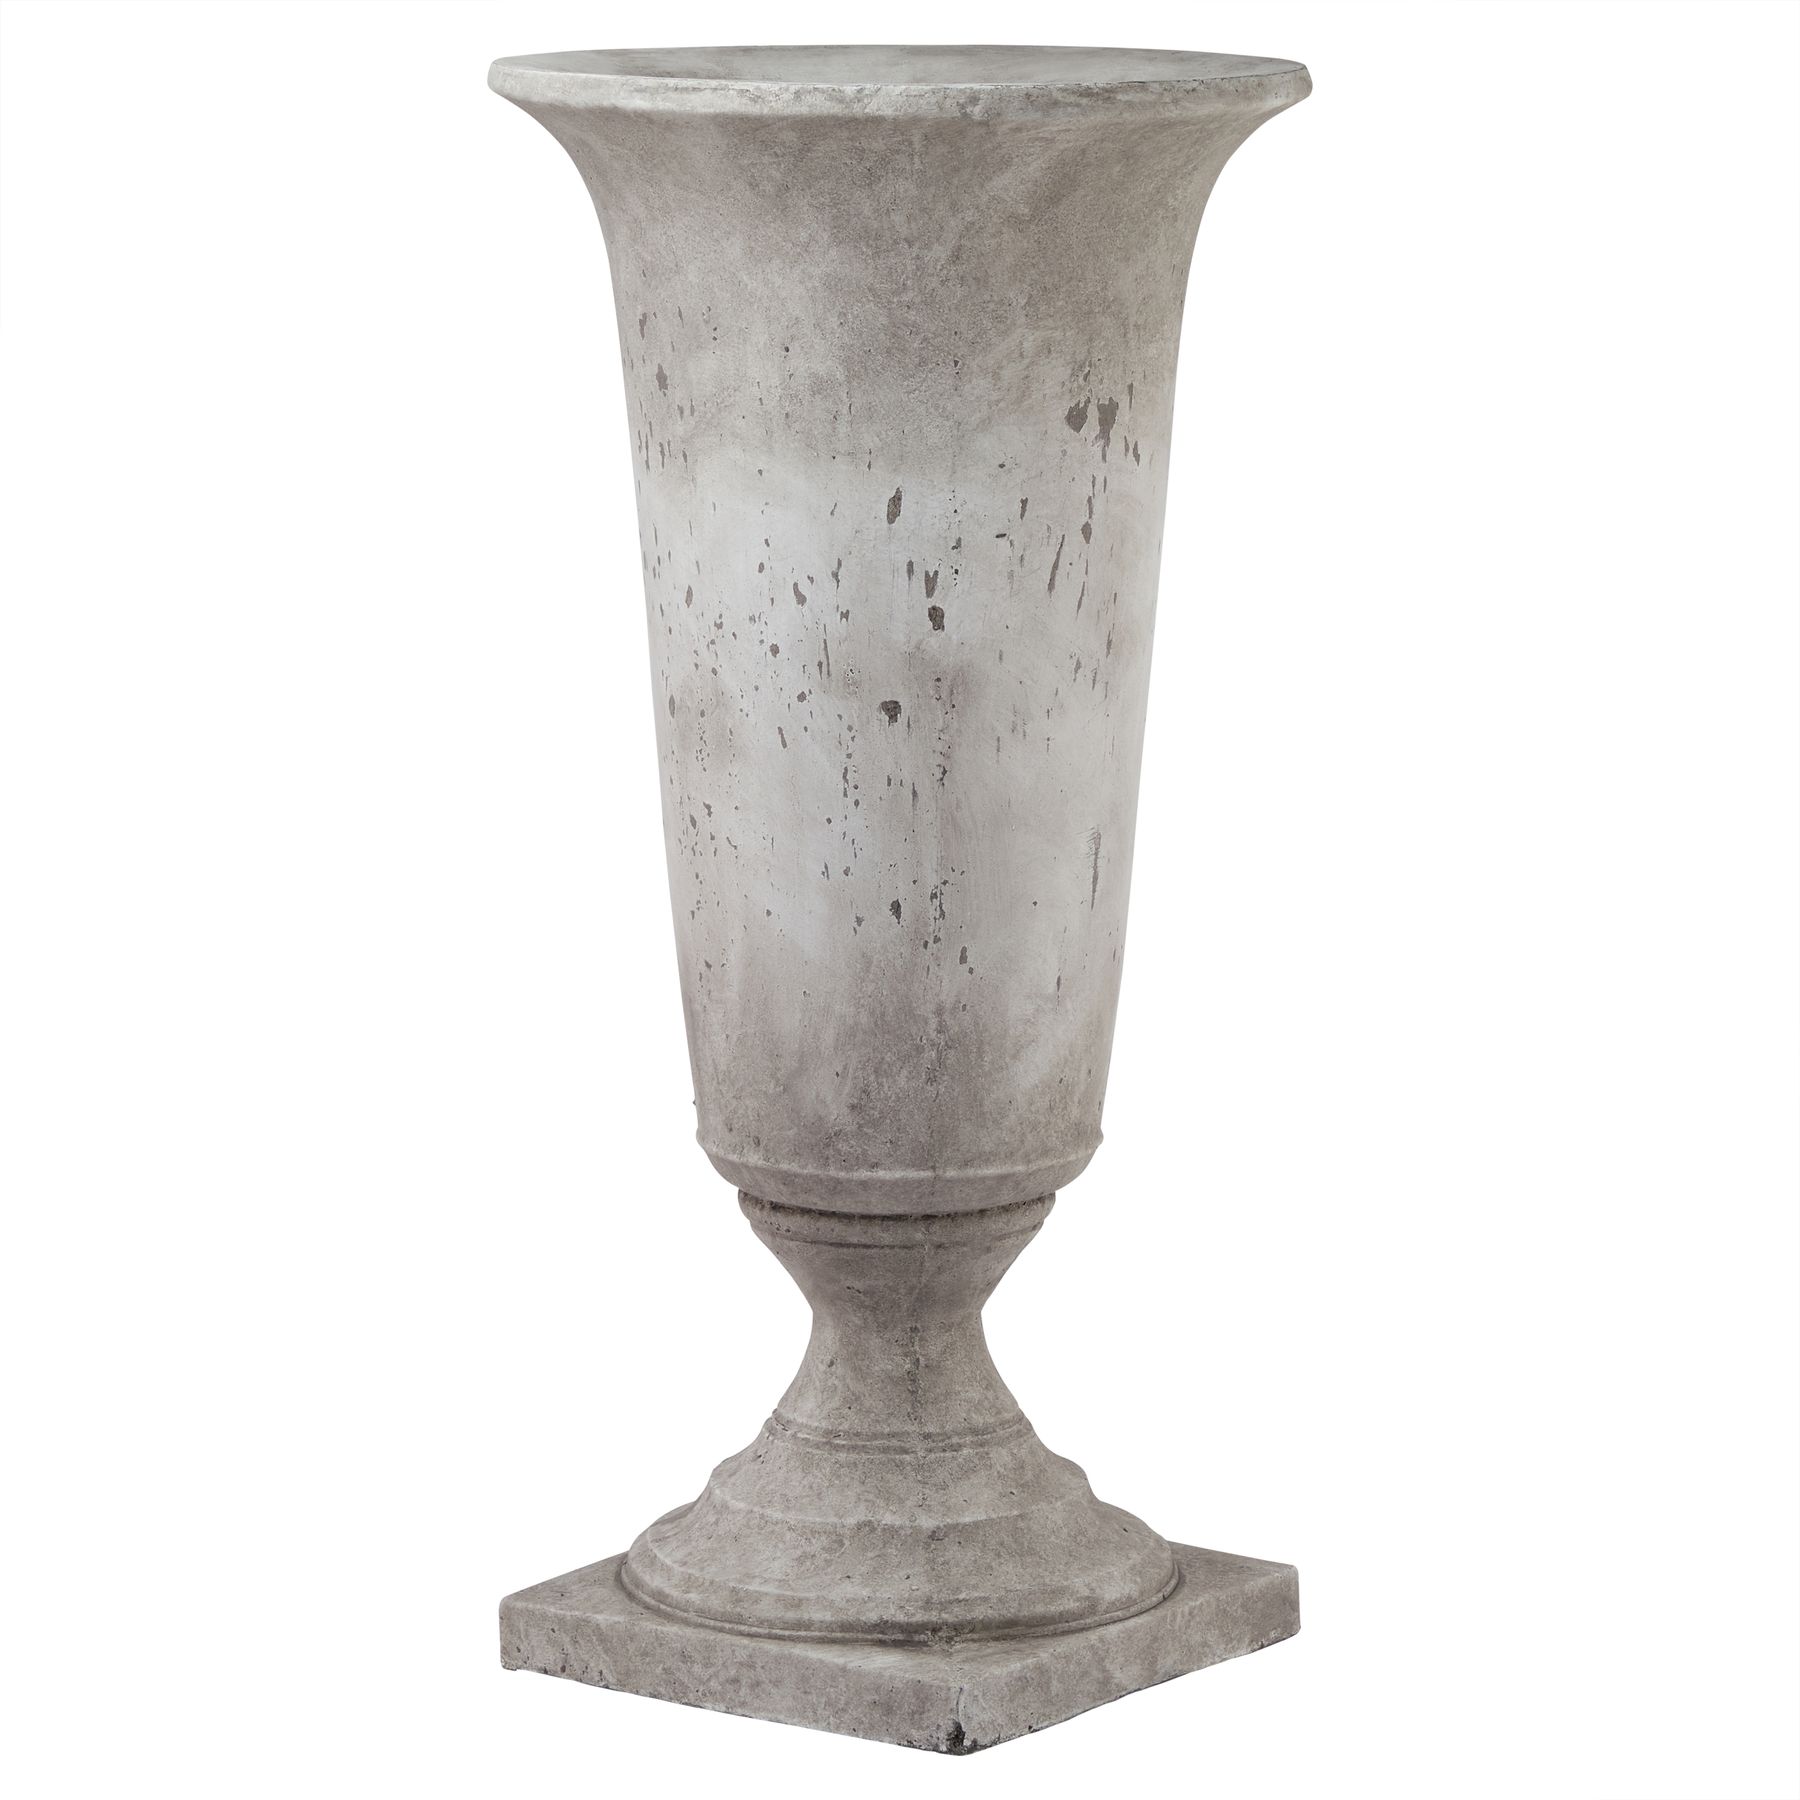 Tall Stone Effect Urn Planter - Image 1